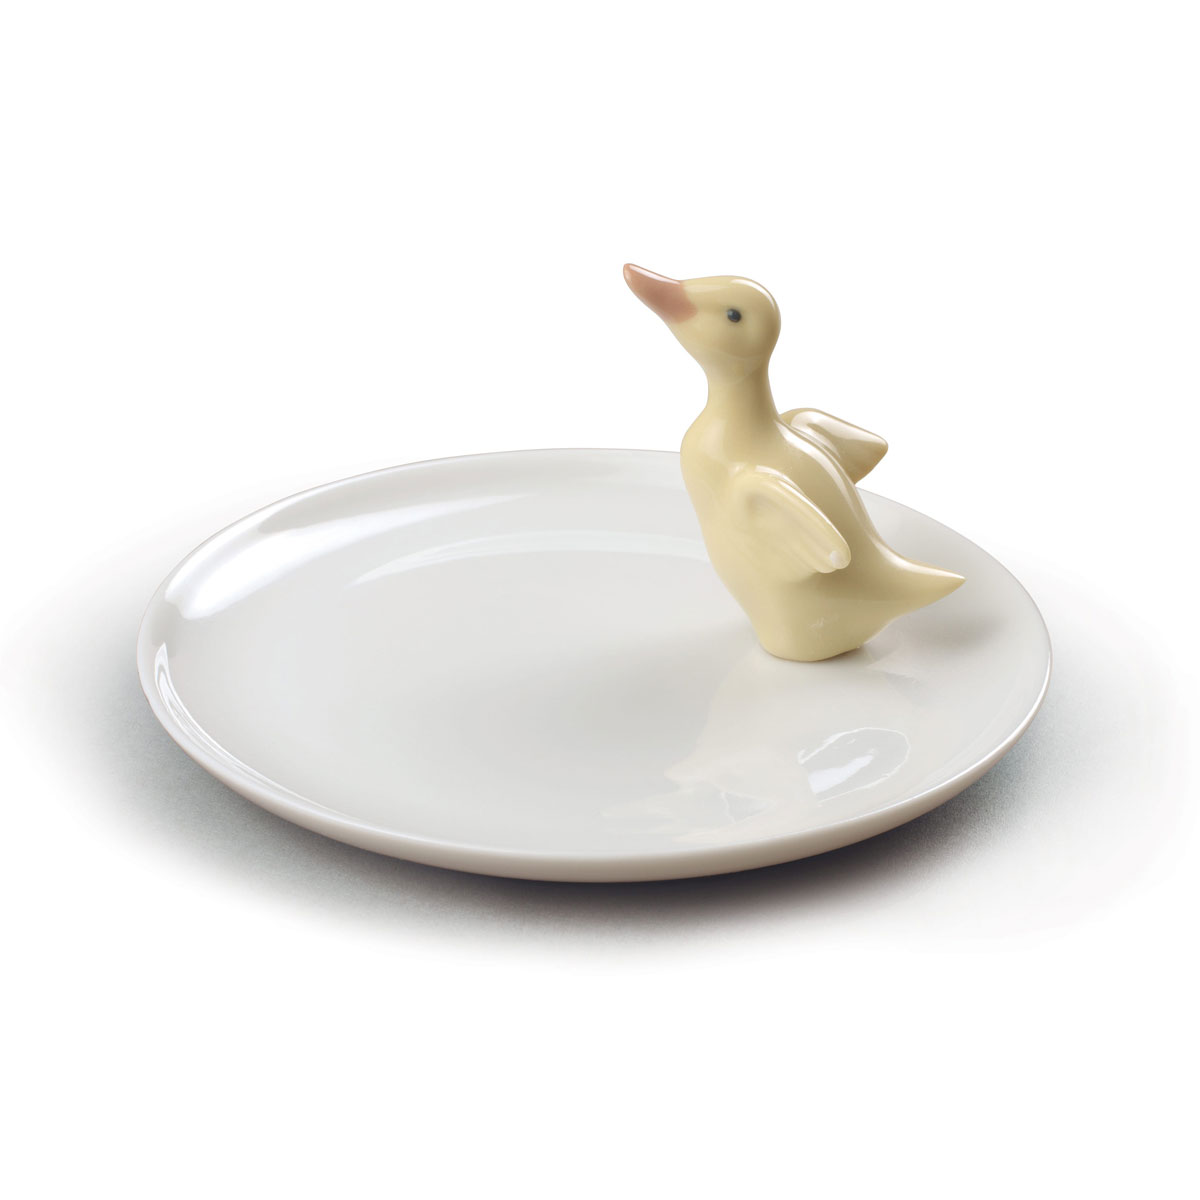 Lladro Art Of The Table, Duck Plate Type 579